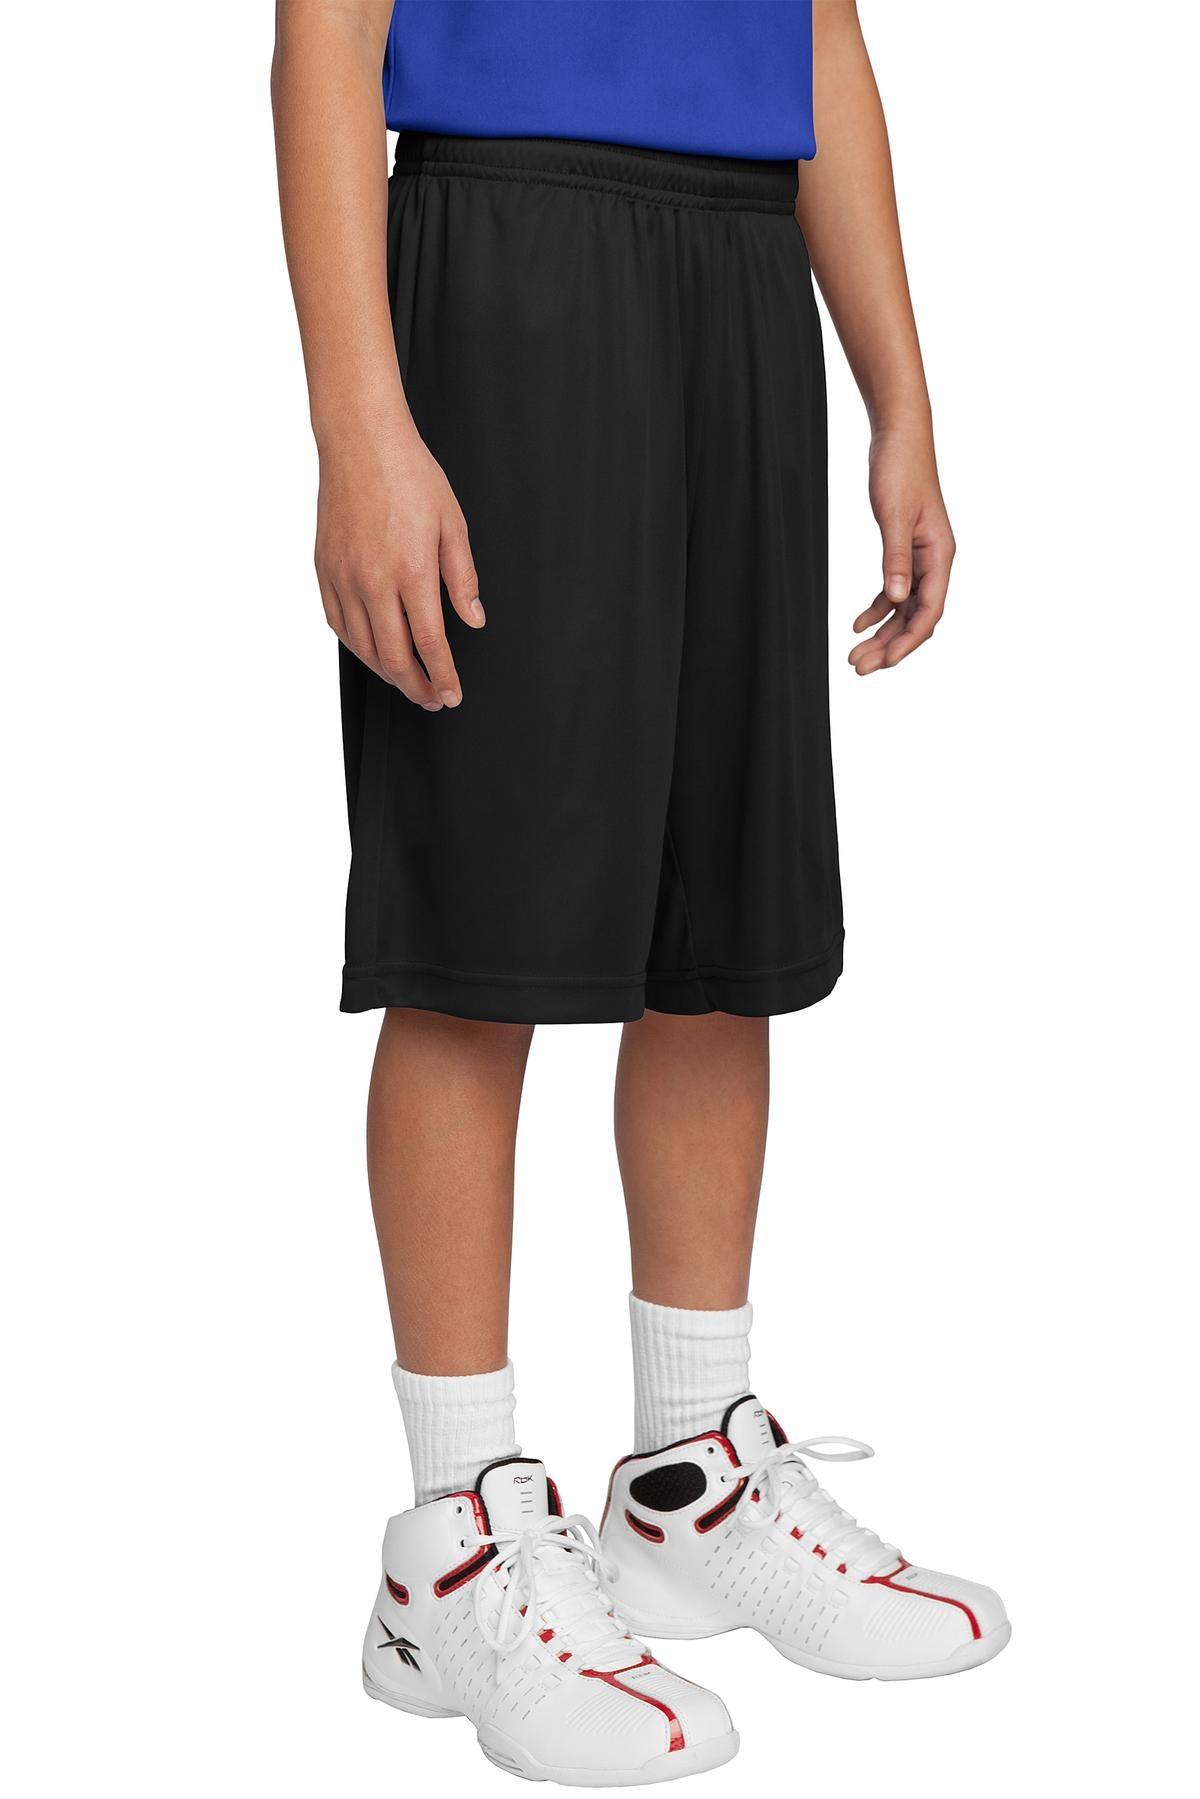 Sport-Tek Youth PosiCharge Competitor Short. YST355 - Dresses Max